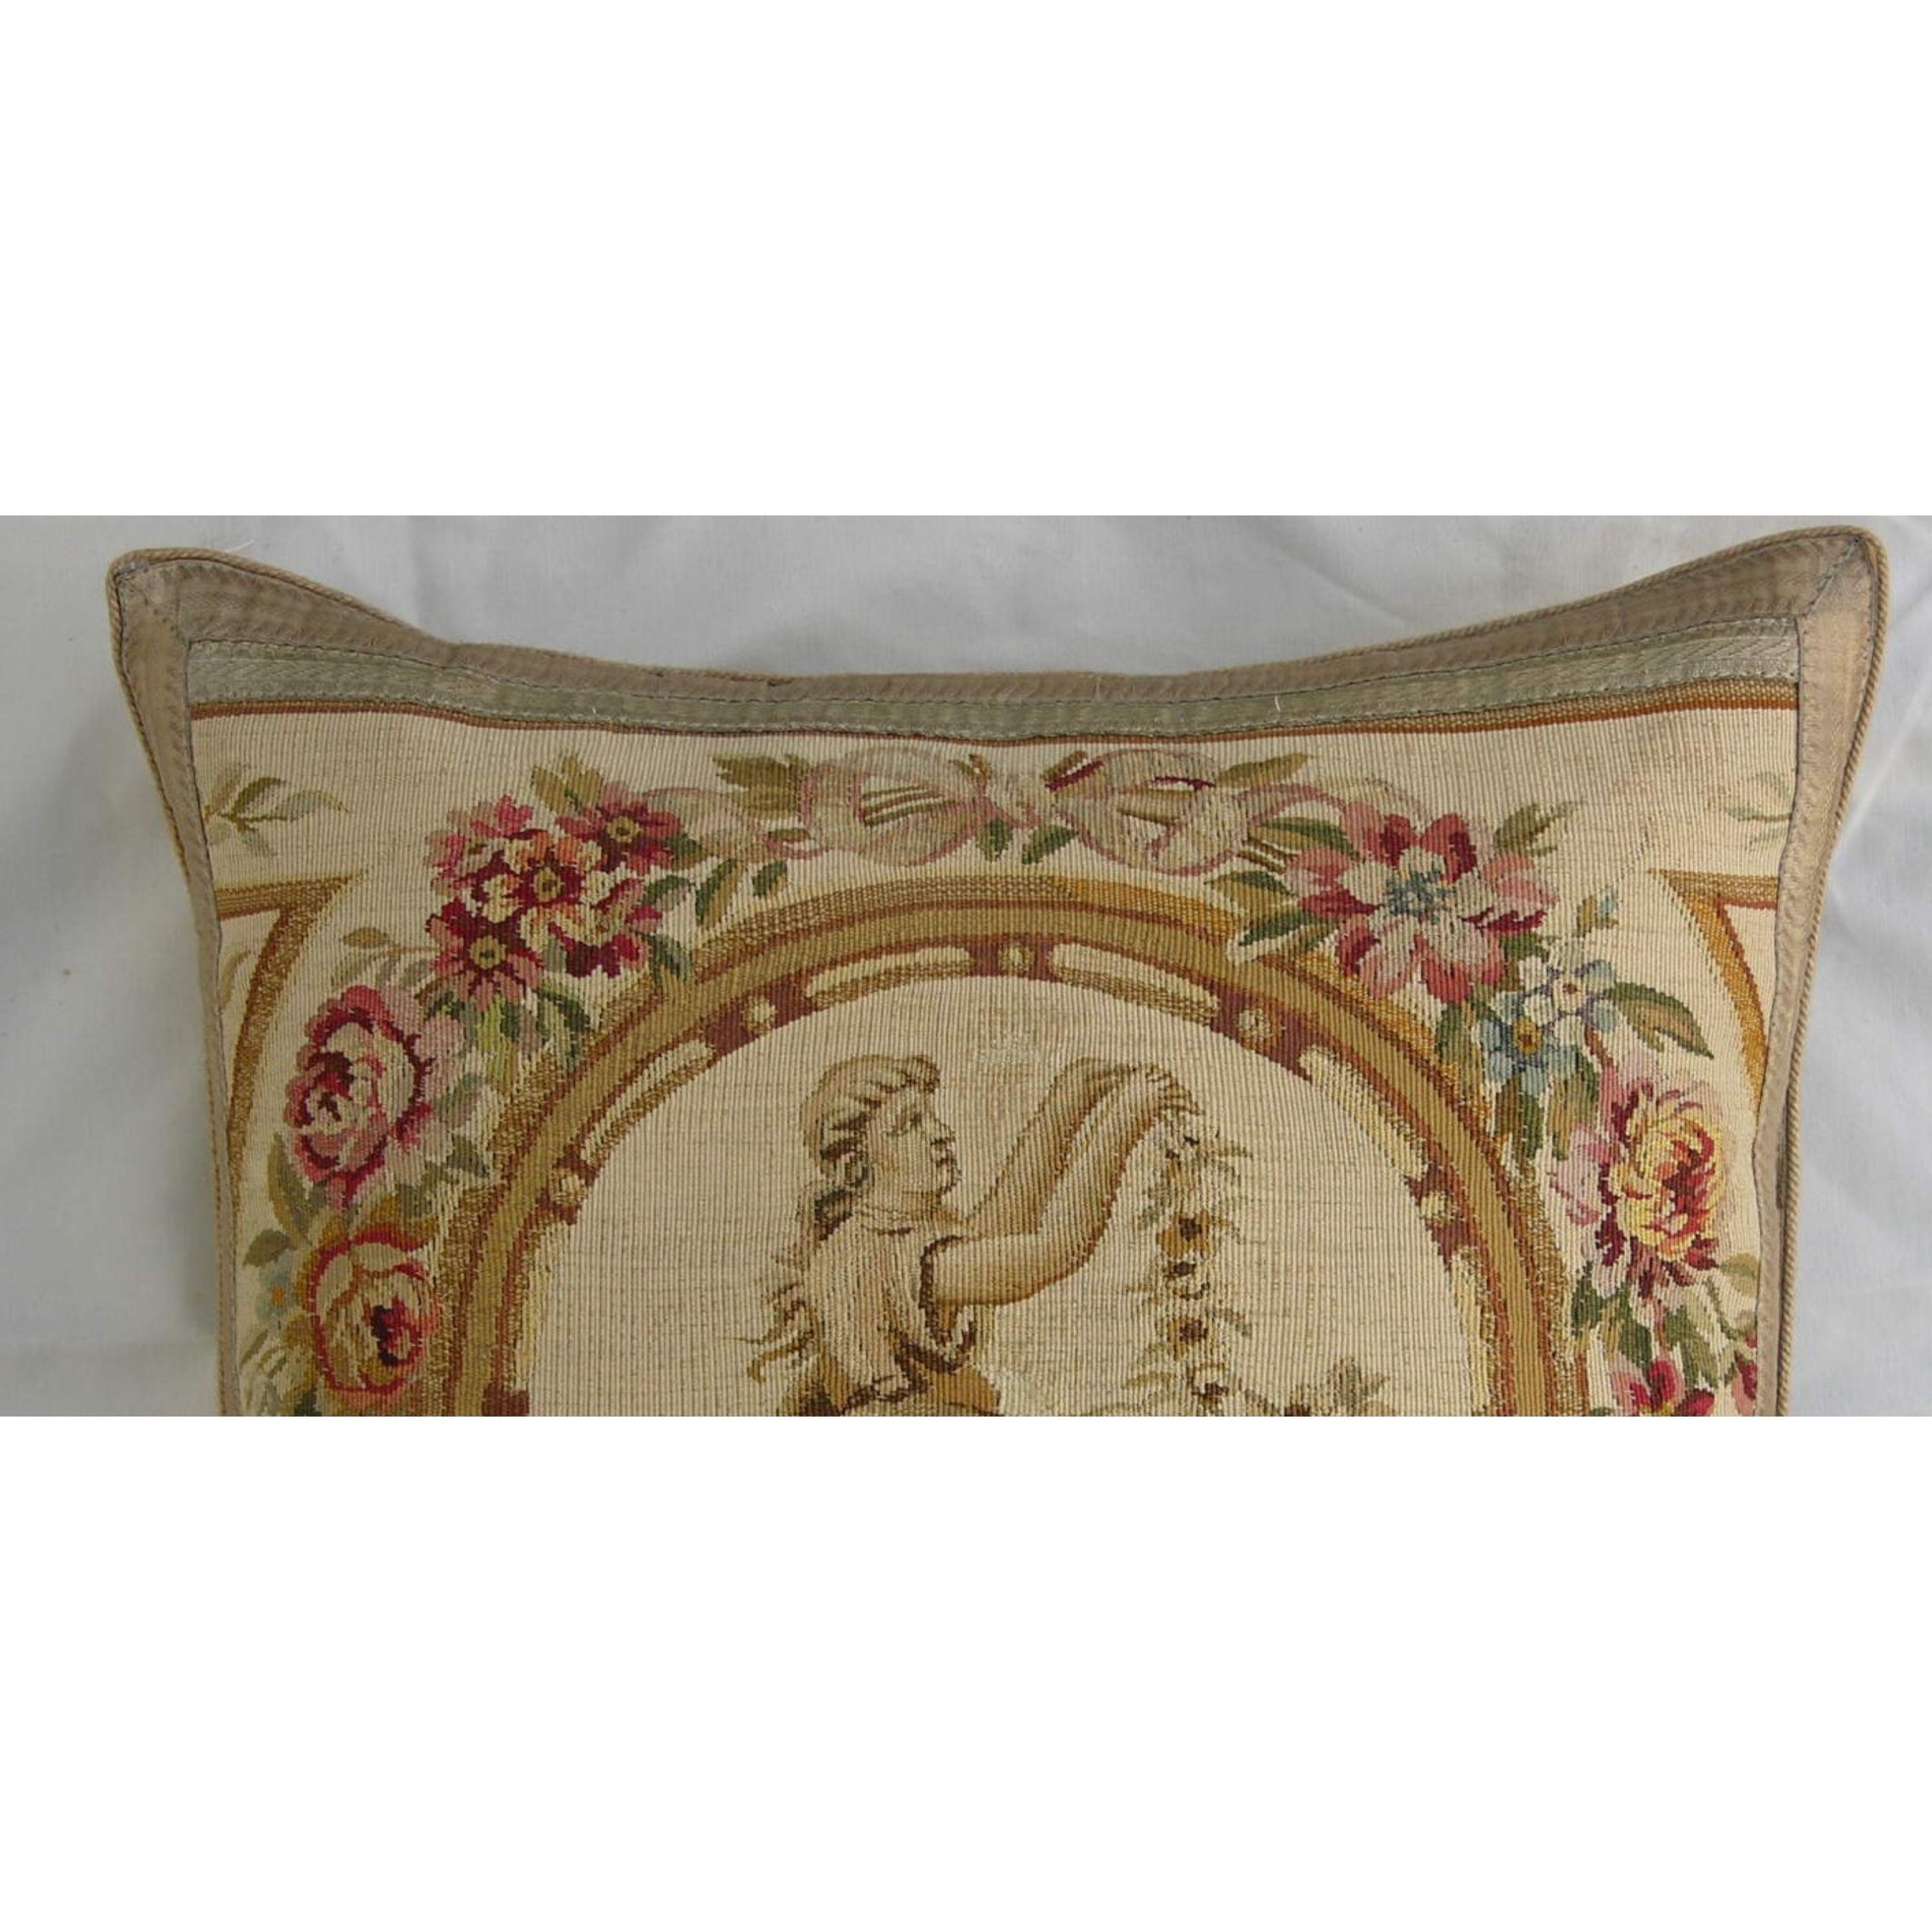 Antique 18th Century French Aubusson Tapestry Pillow 21'' x 20